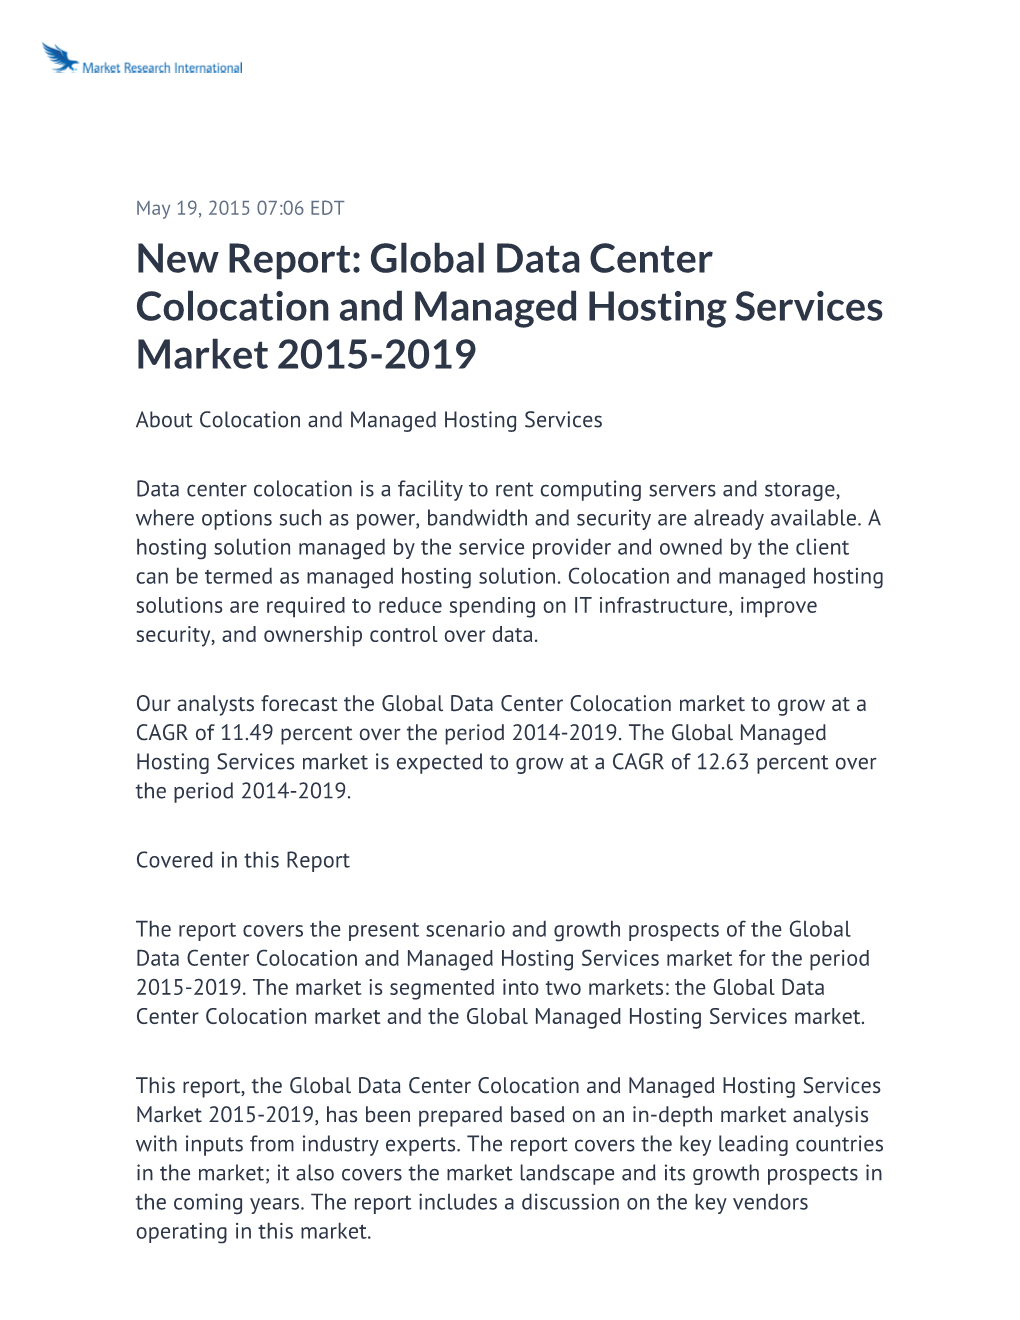 New Report: Global Data Center Colocation and Managed Hosting Services Market 2015-2019